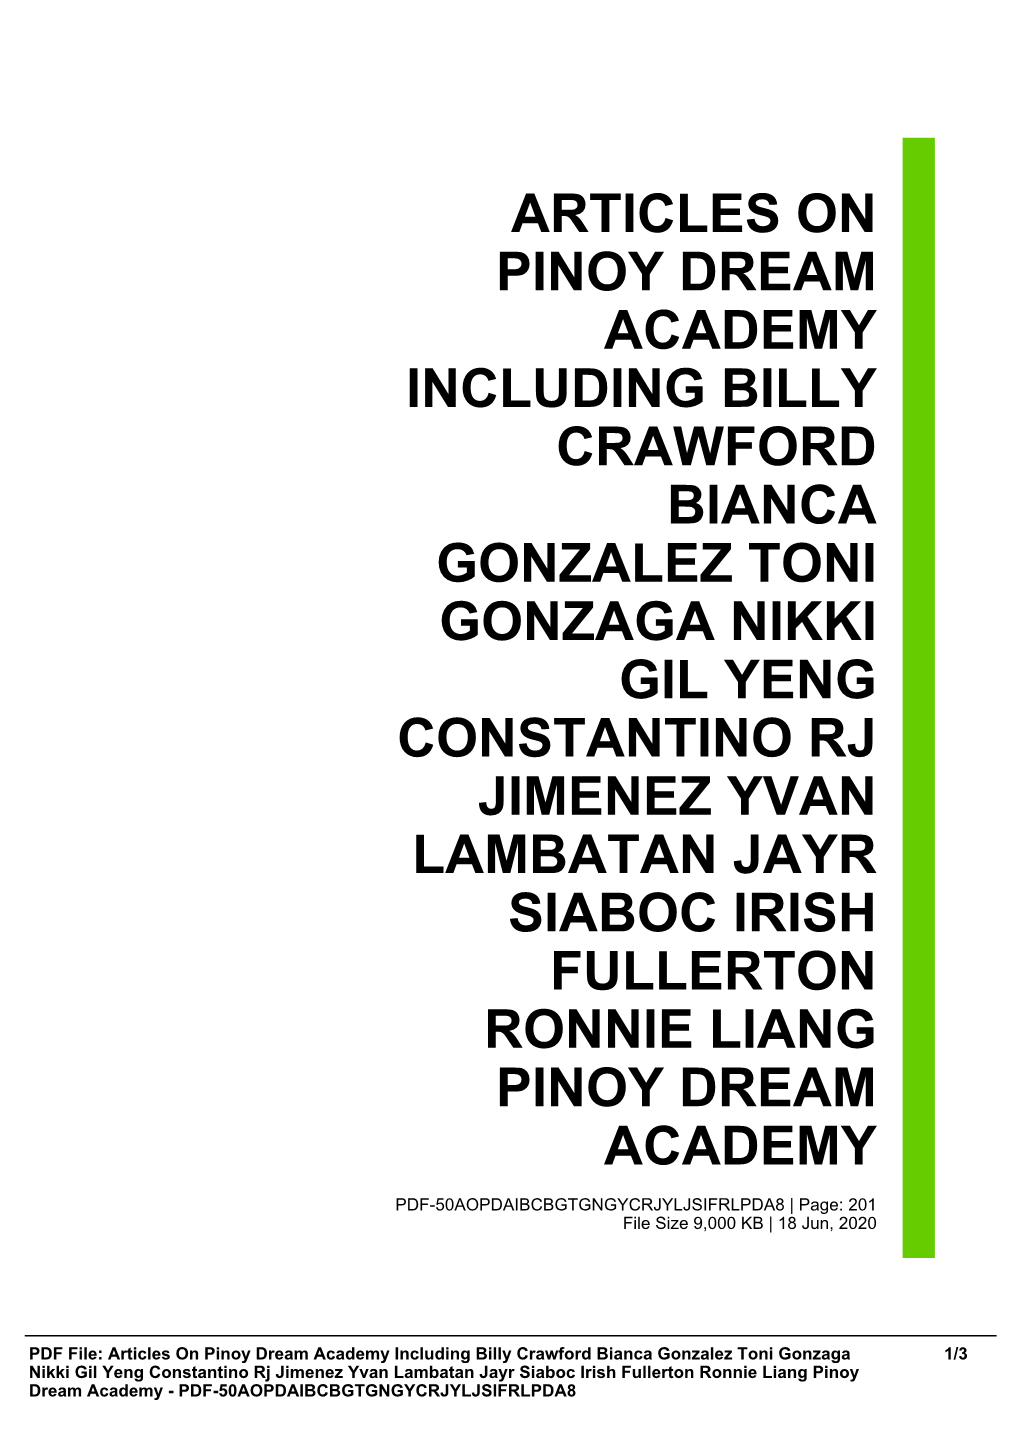 Articles on Pinoy Dream Academy Including Billy Crawford Bianca